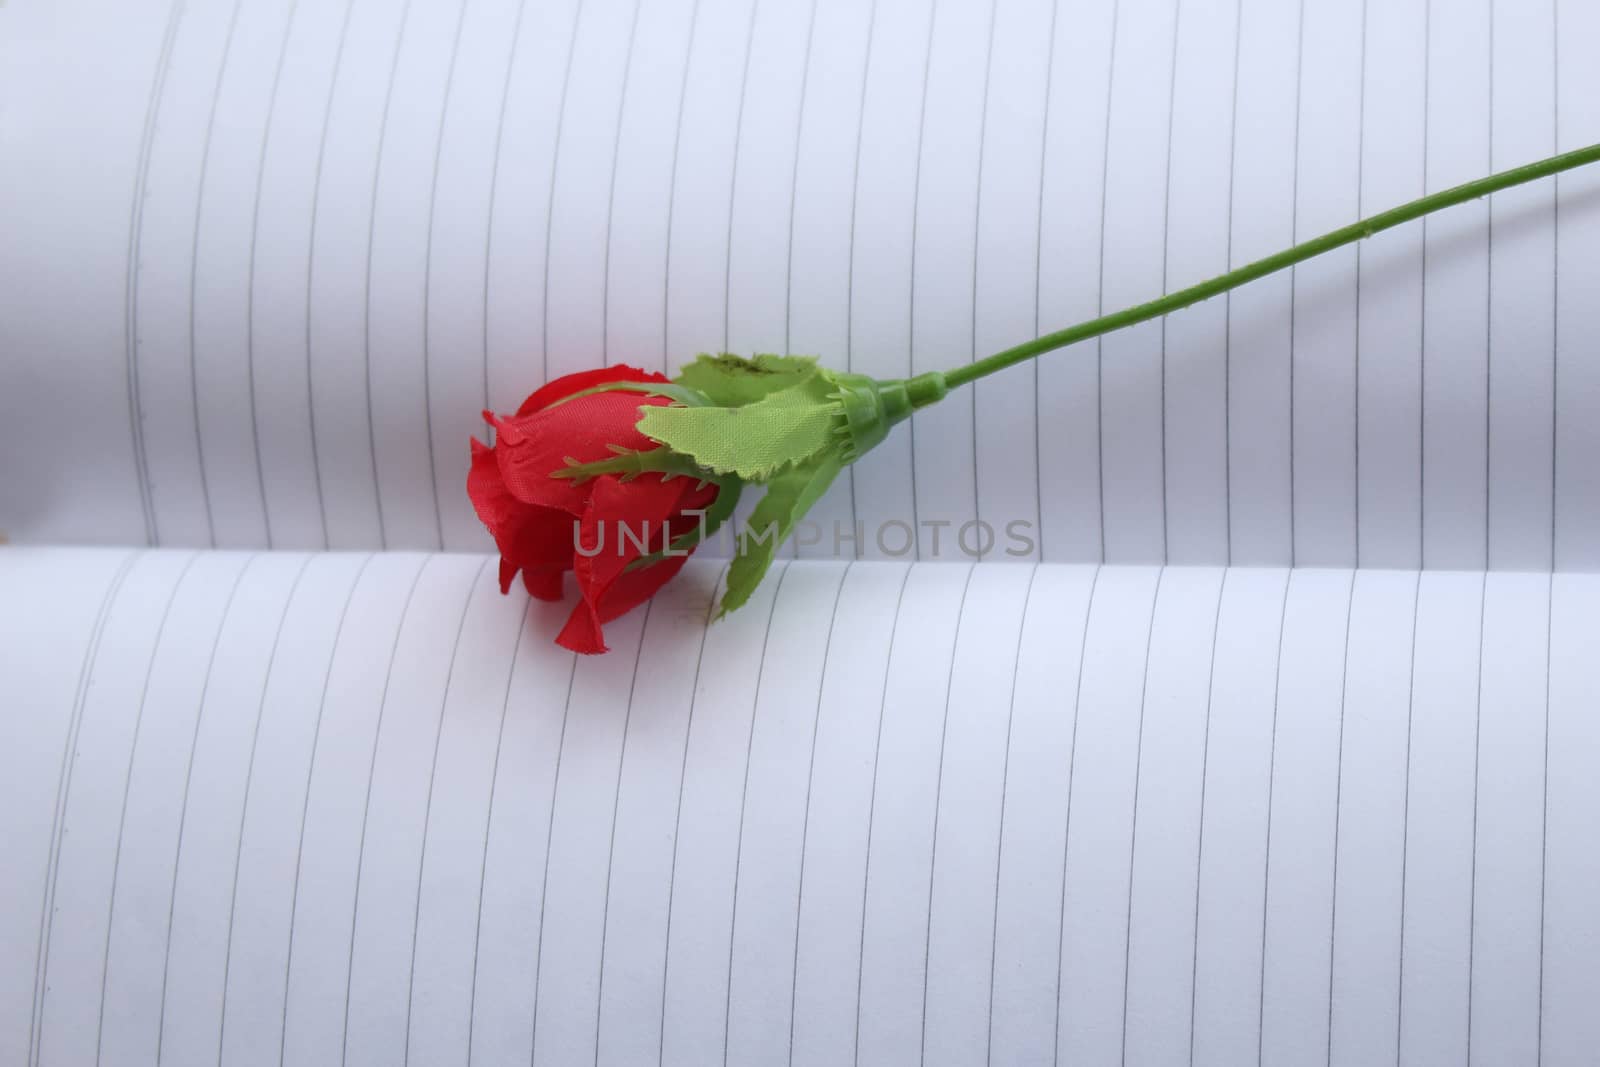 plastic rose on the notebook by kaidevil